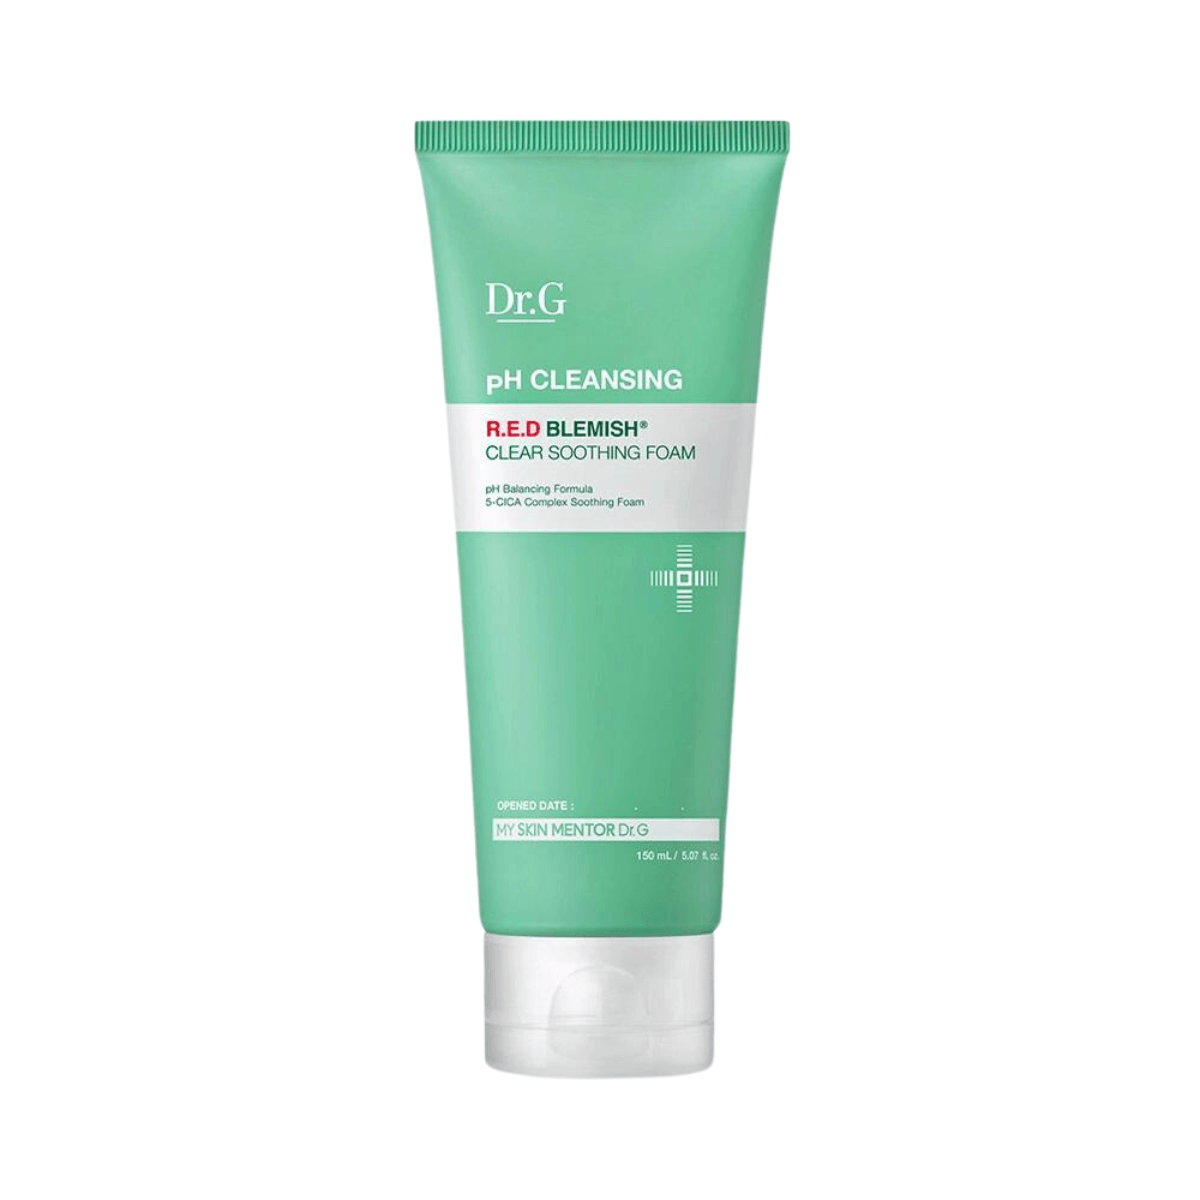 R.E.D Blemish Clear Soothing Foam - 150 ml